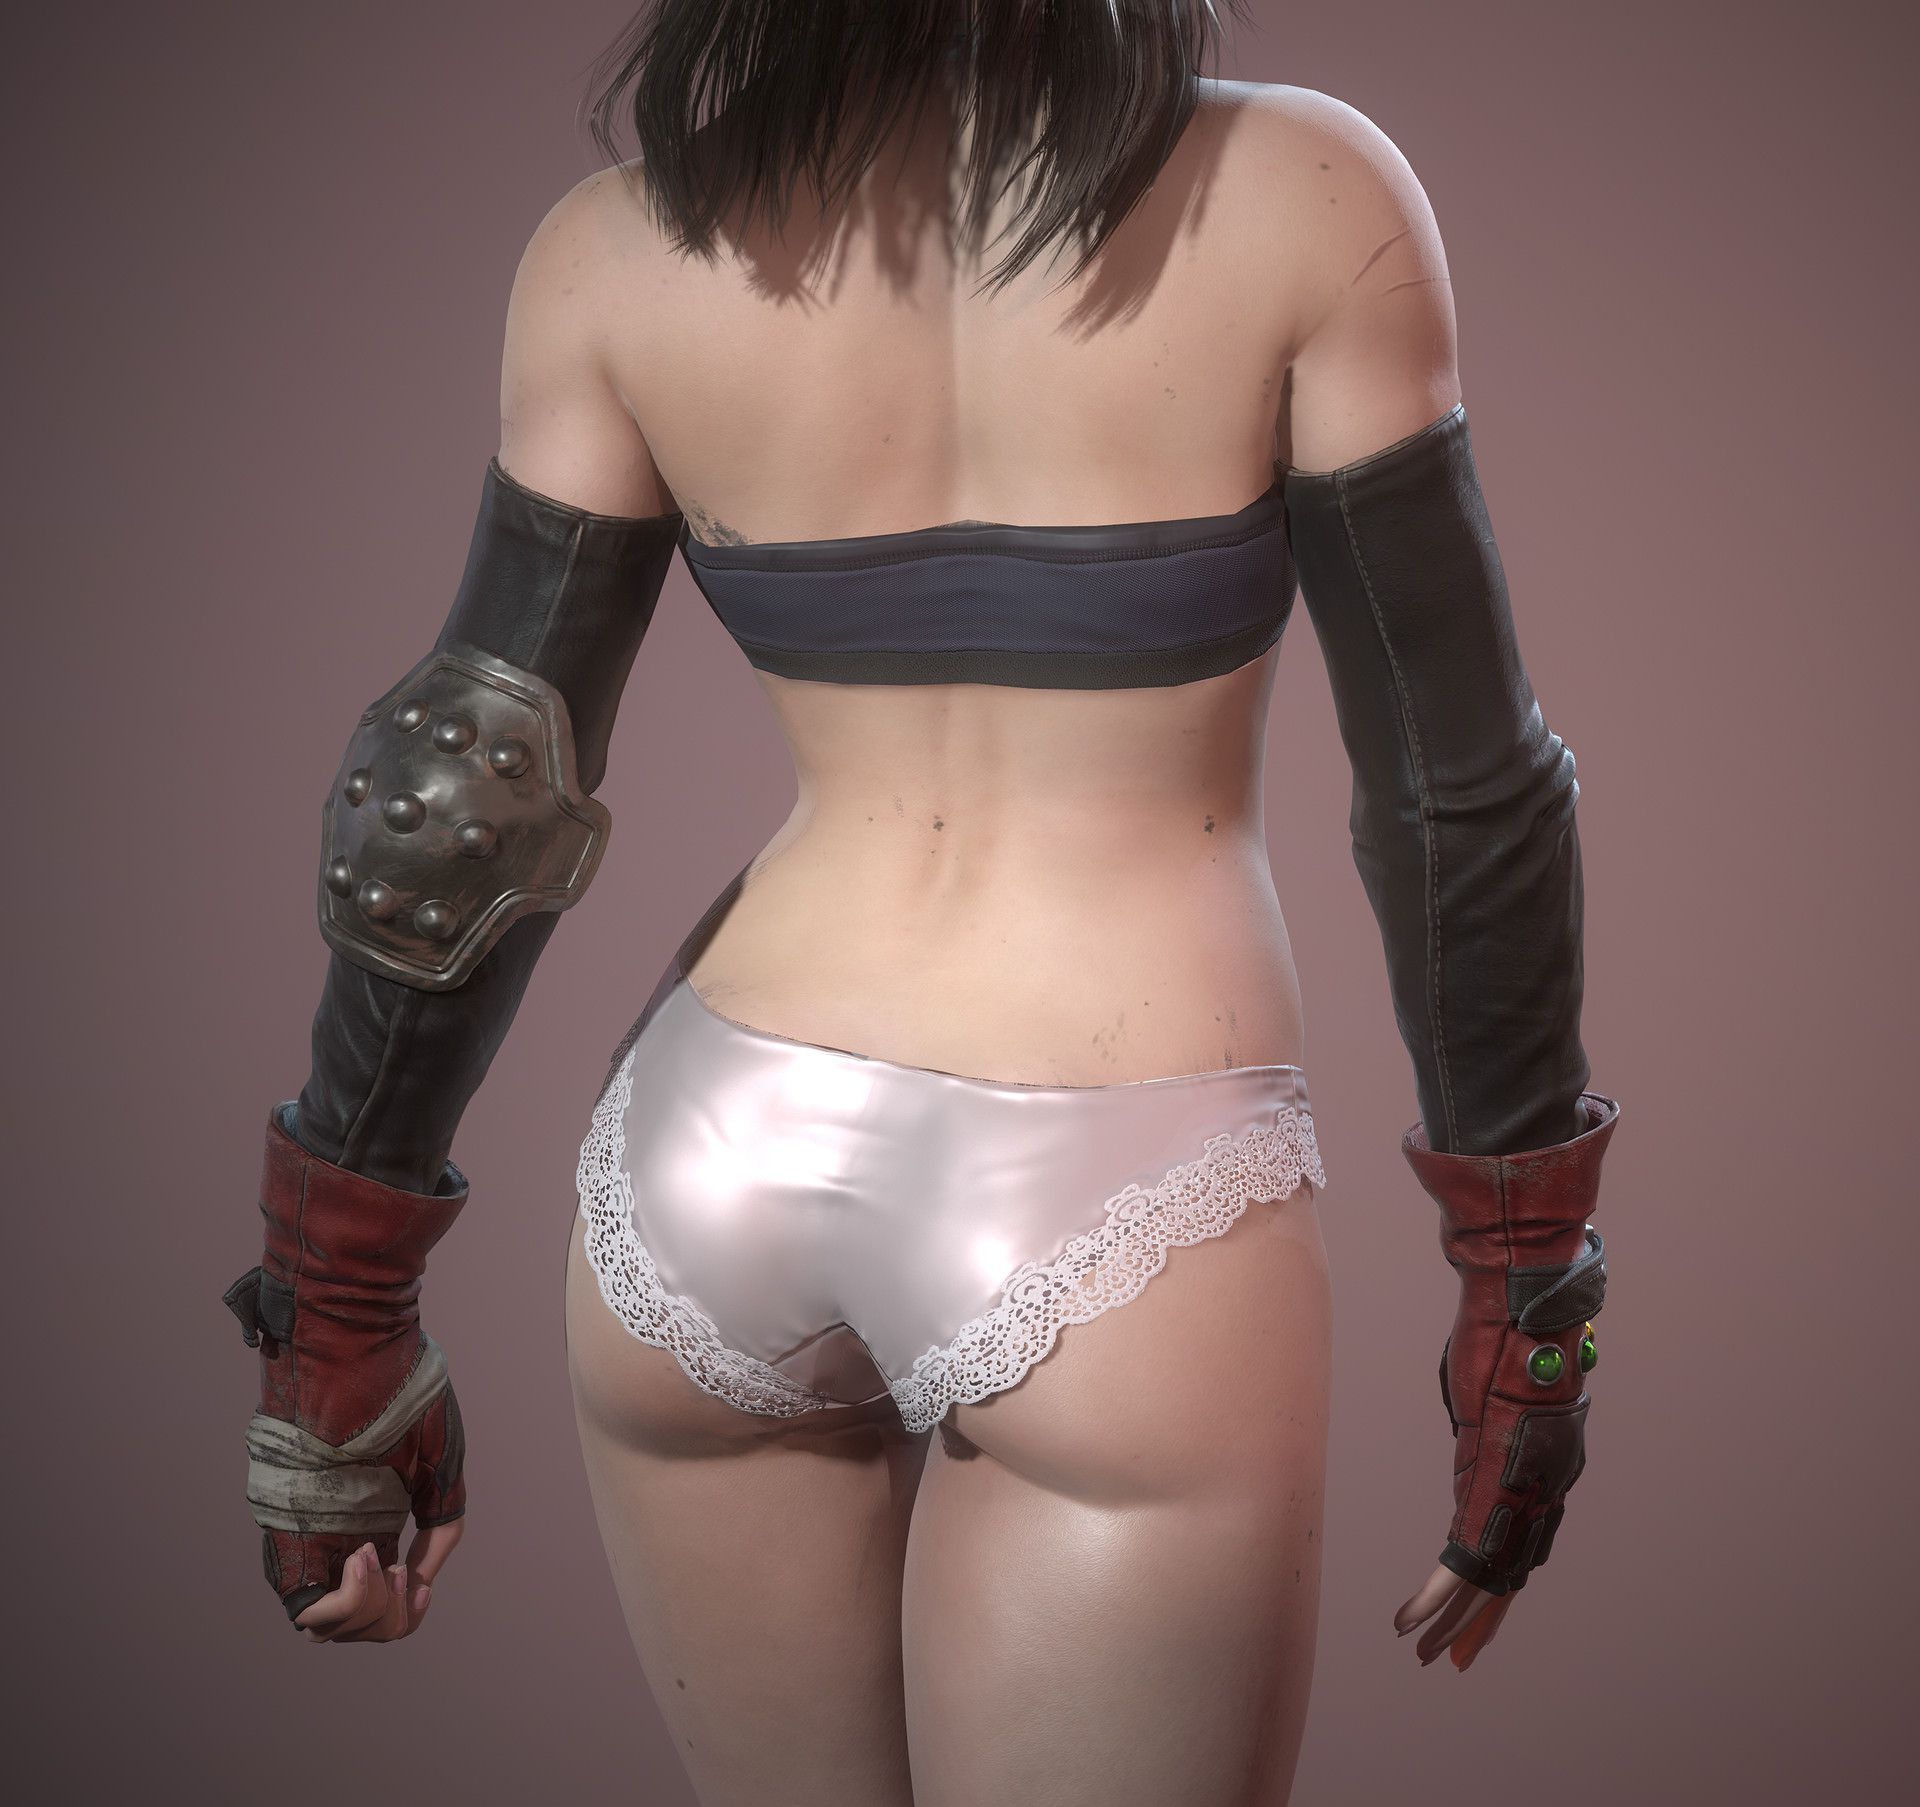 Crimson is the first person who portrayed Ff7's Tifa erotic, isn't he? 12